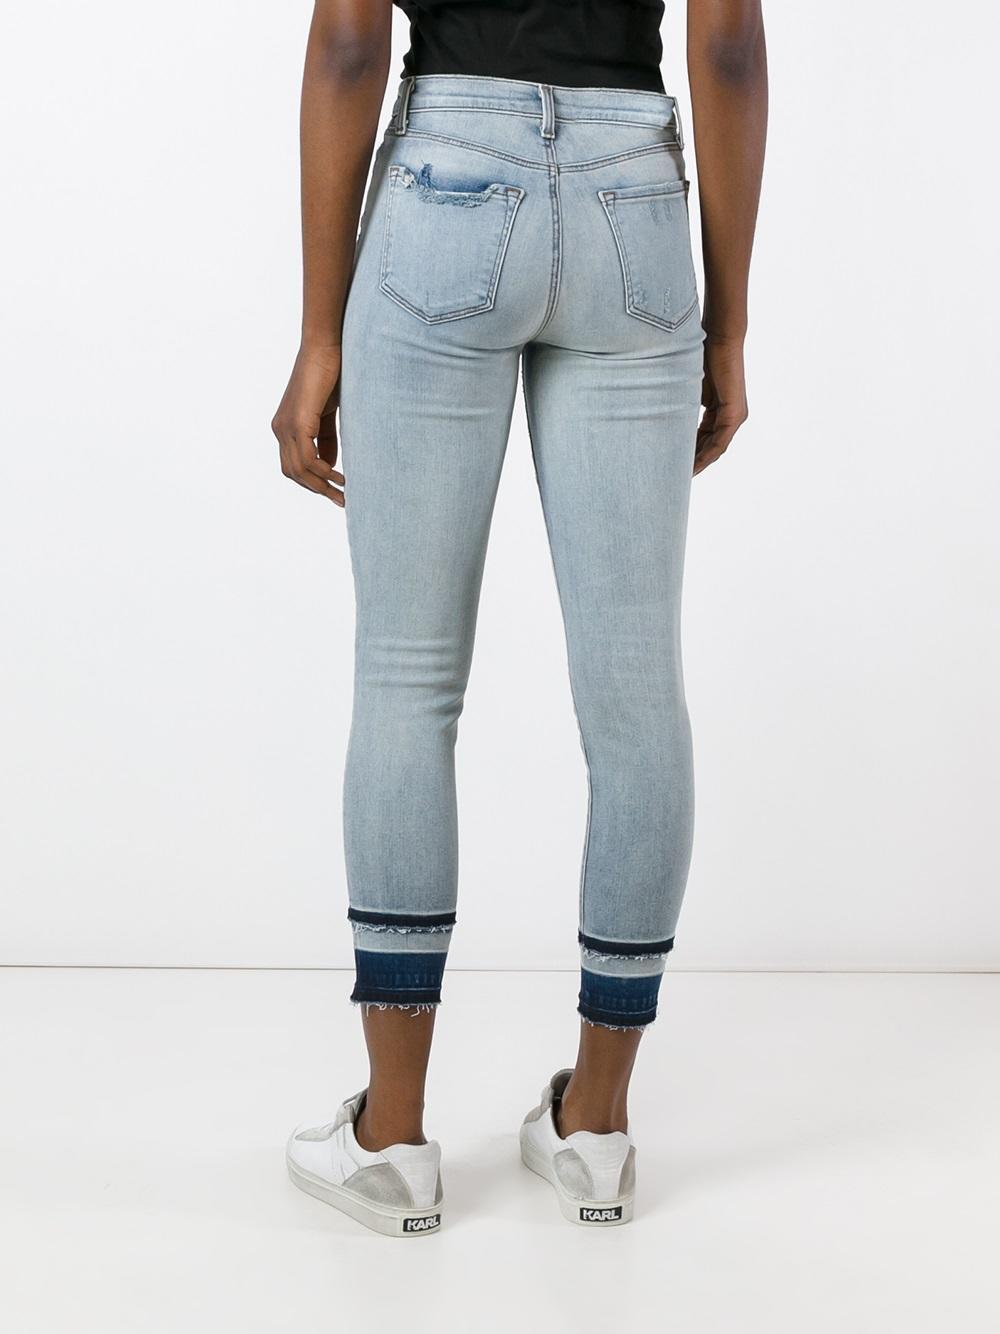 Lyst - J brand Cropped Jeans in Blue